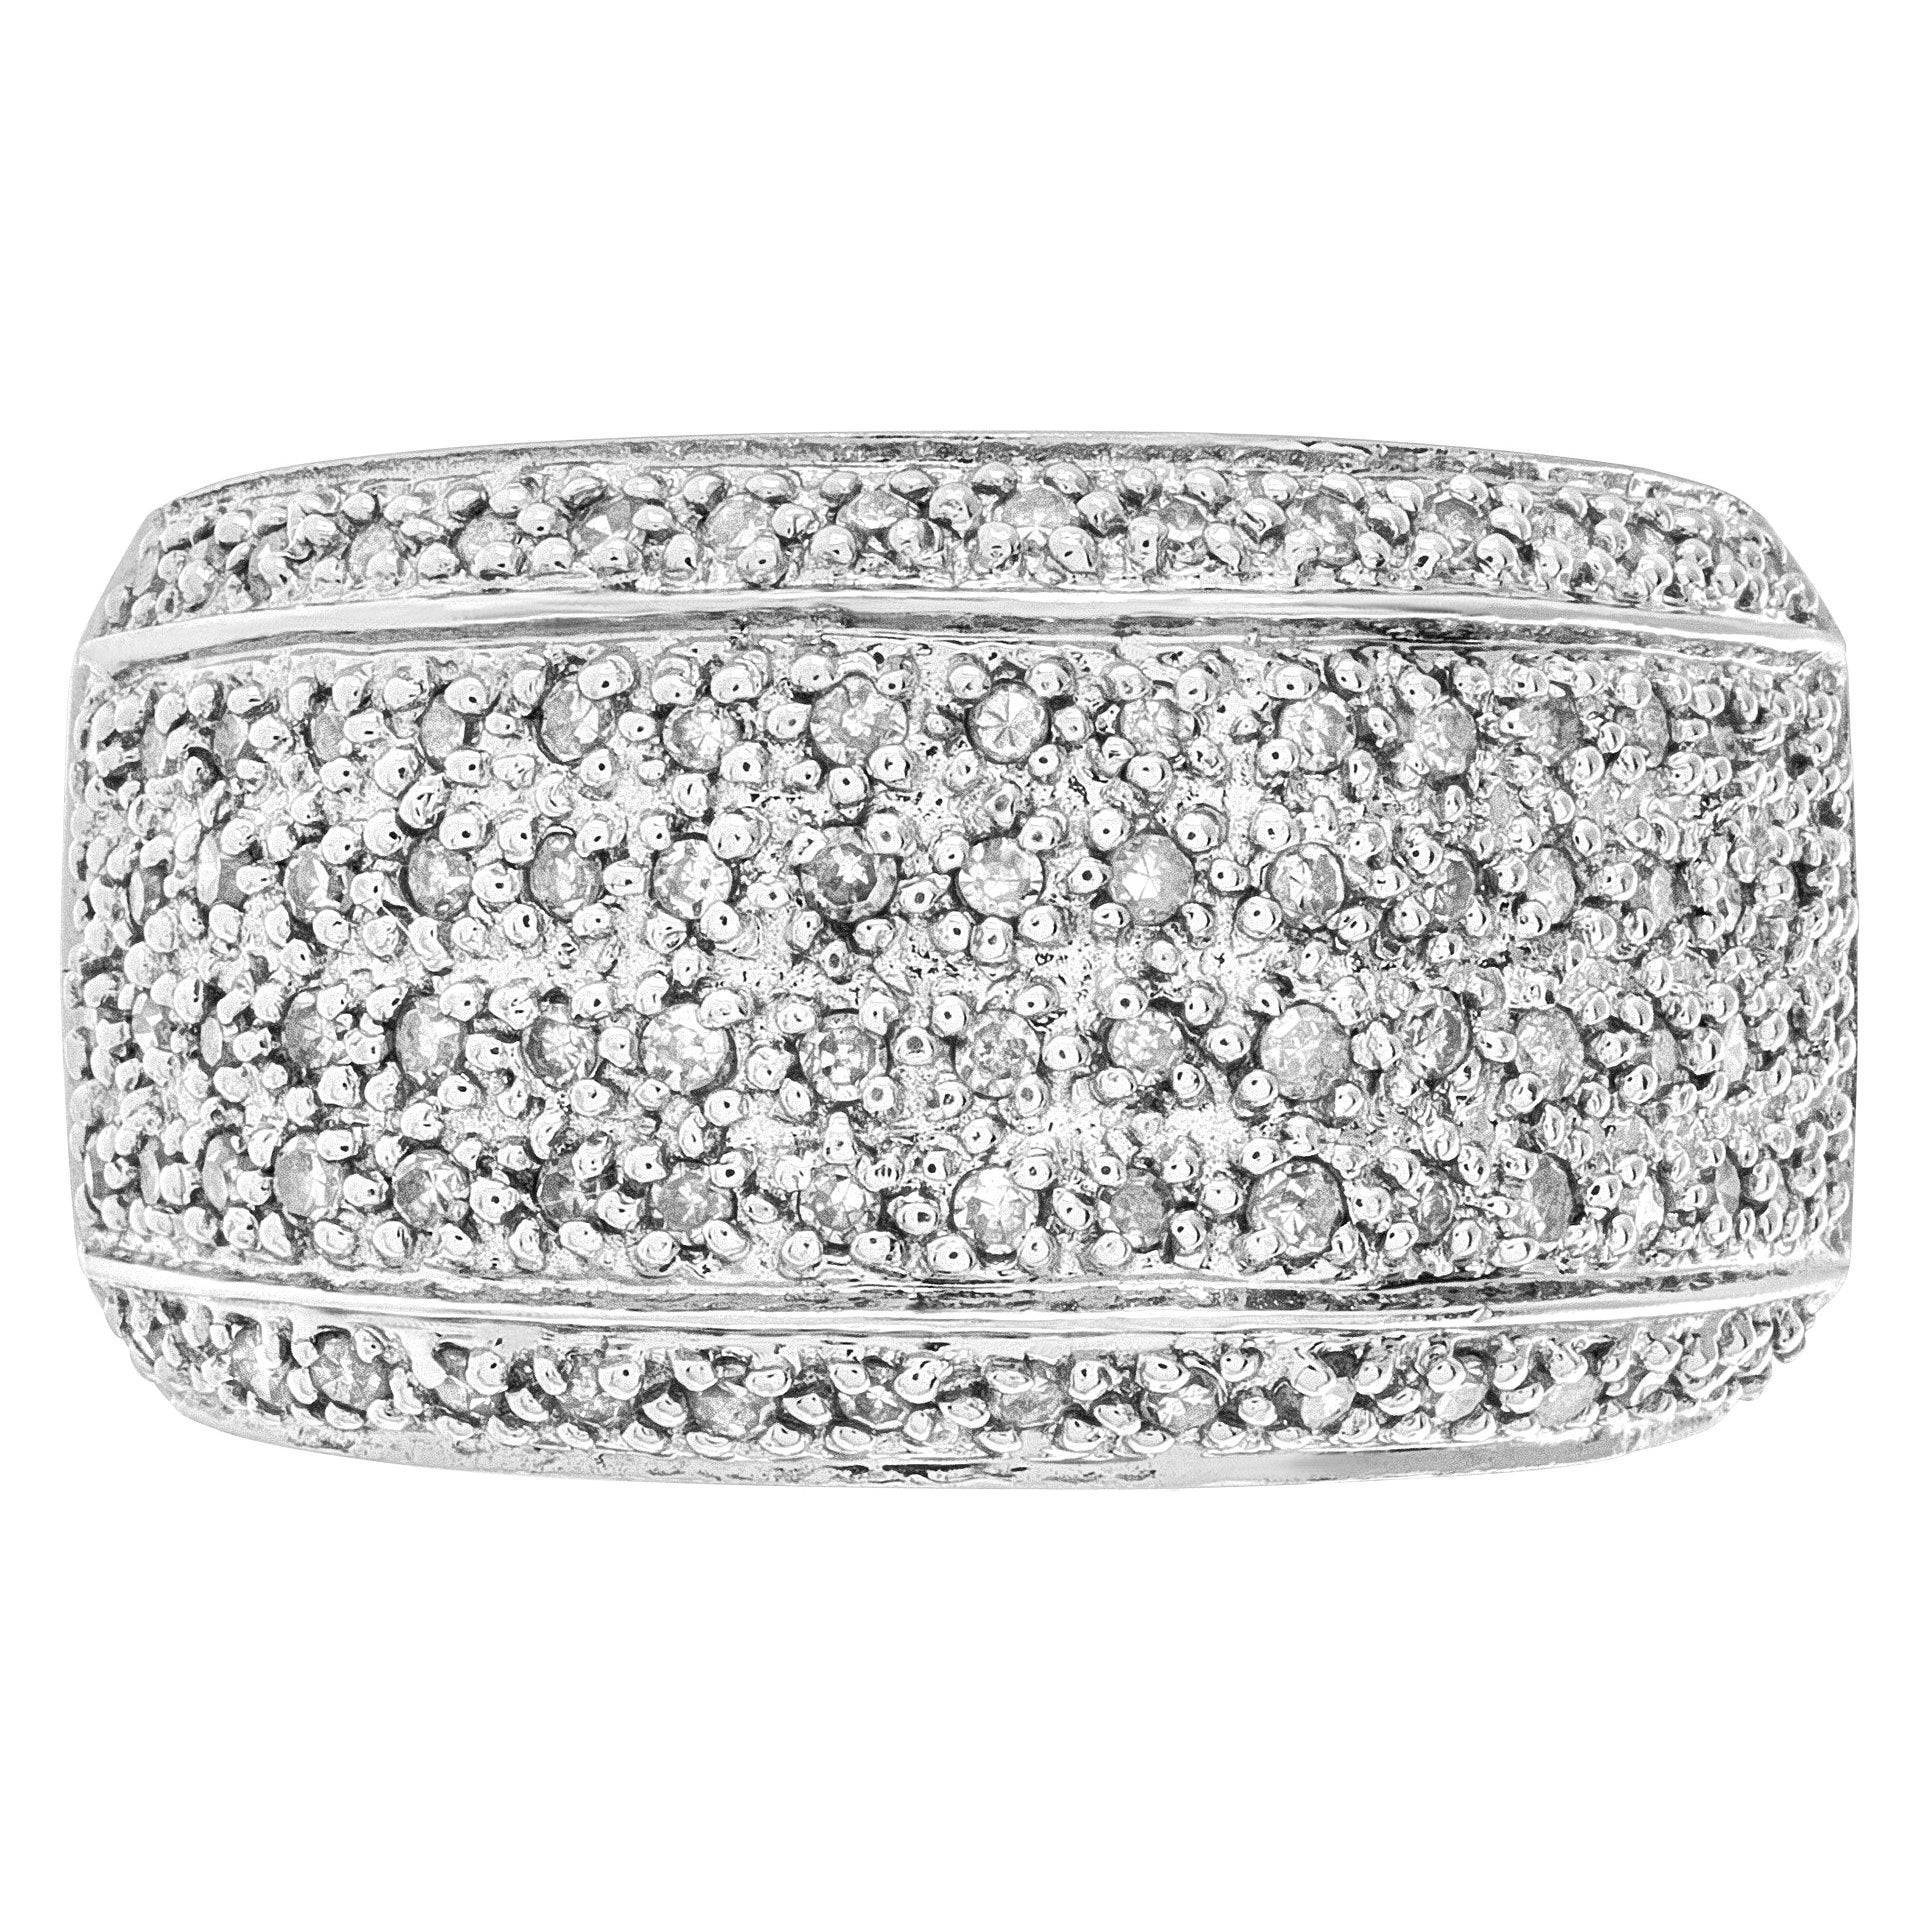 Pave Diamond Ring in 14k White Gold with Approx. 0.96 Carats in Diamonds